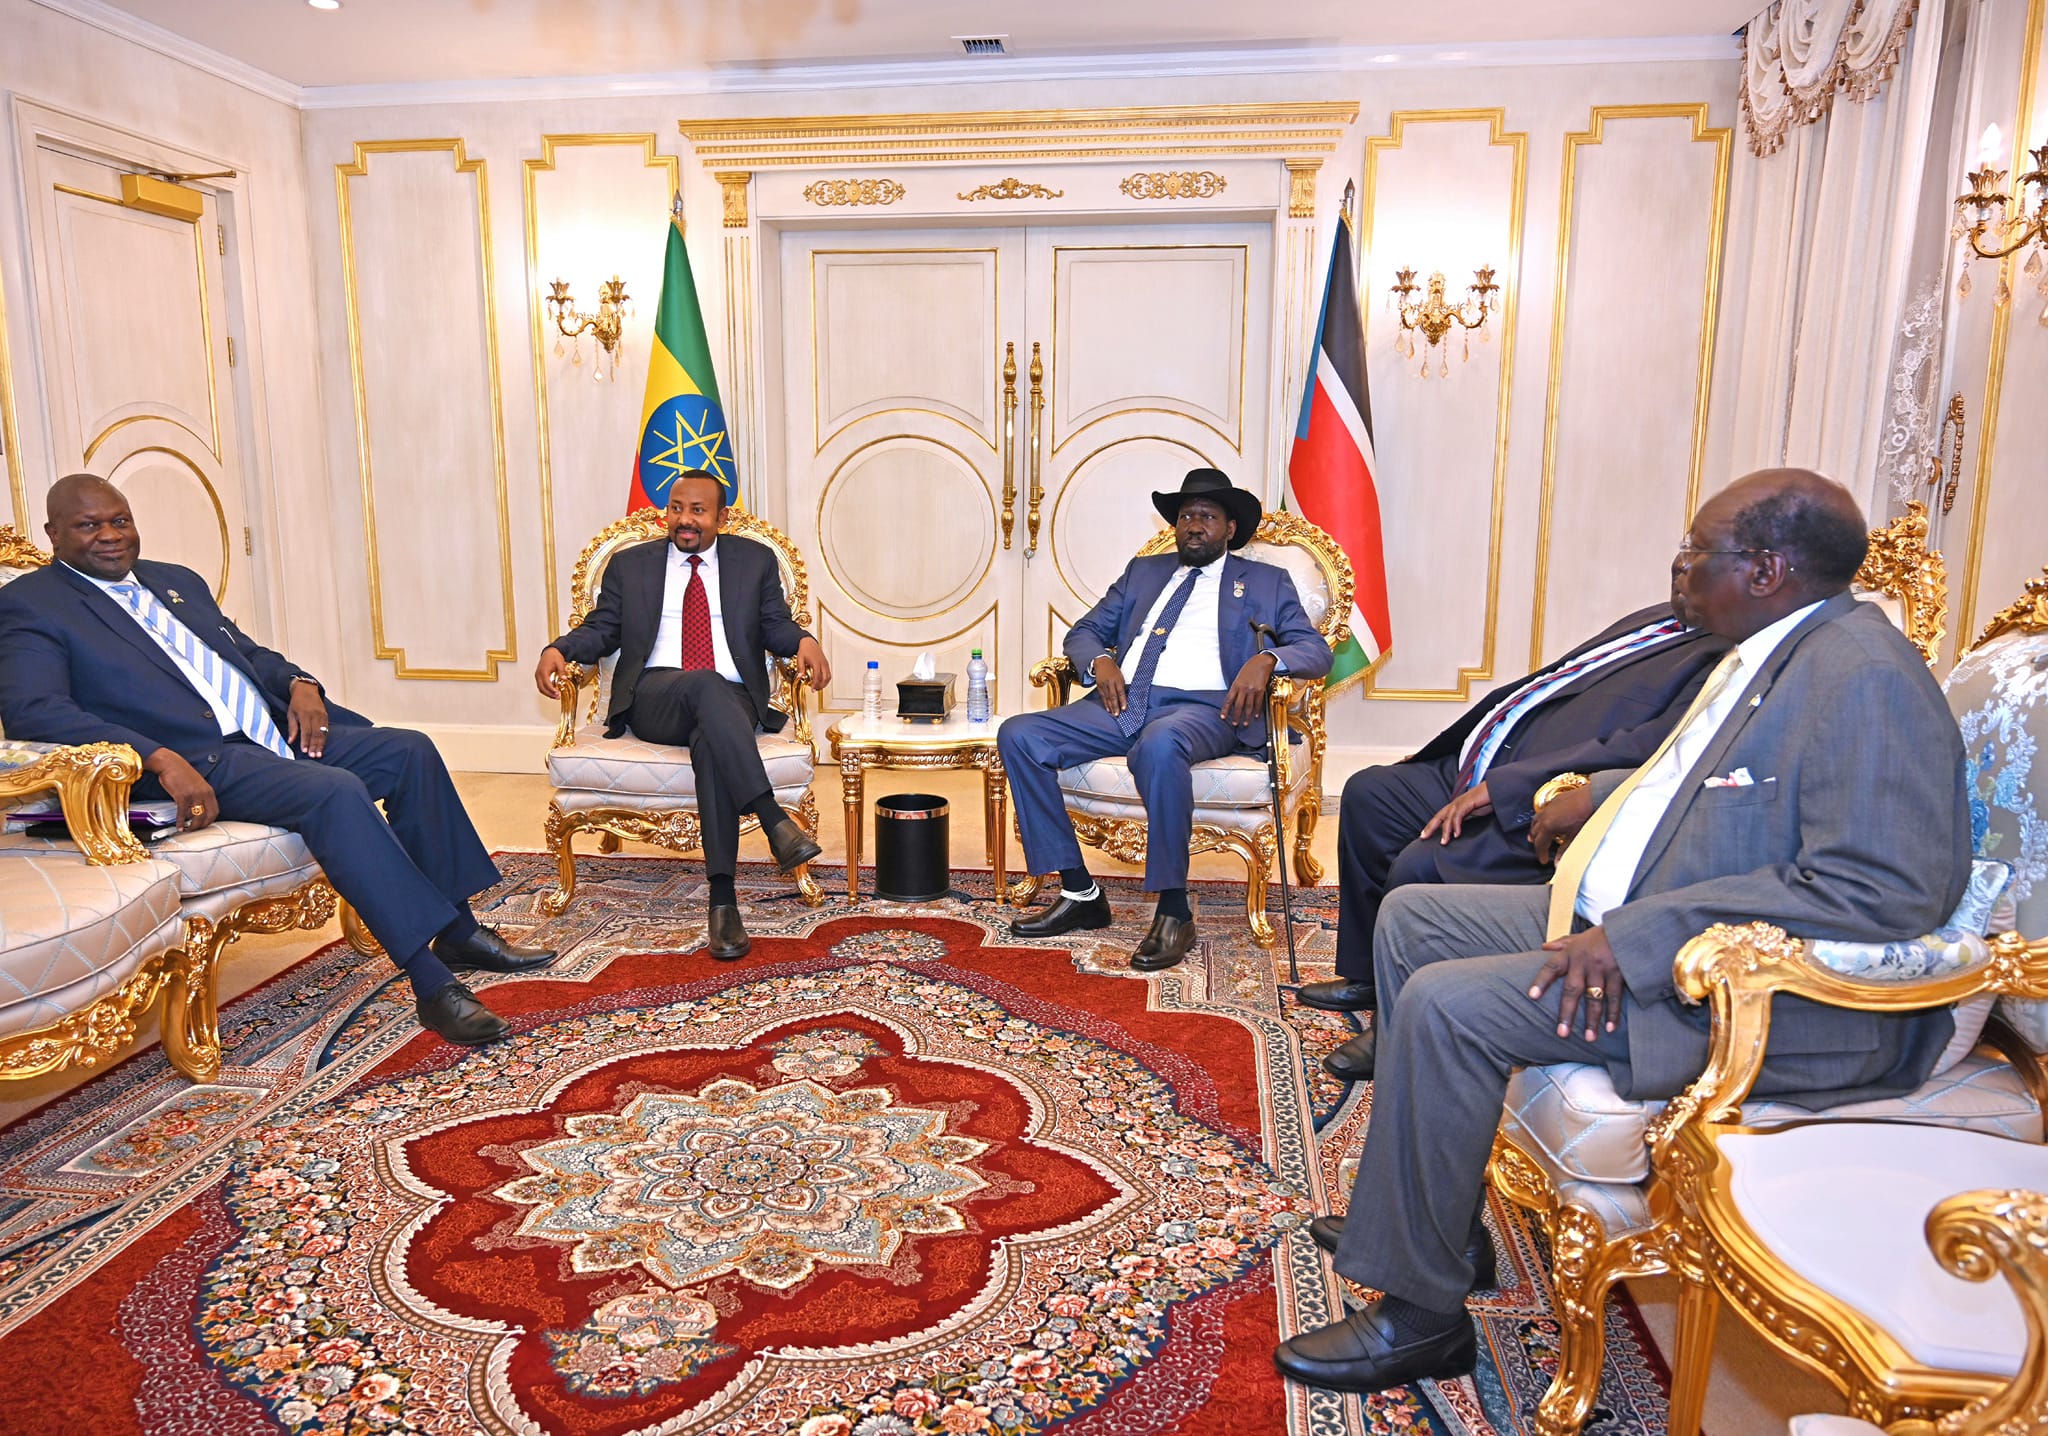 Ethiopia committed to stability in S. Sudan -says PM Abiy